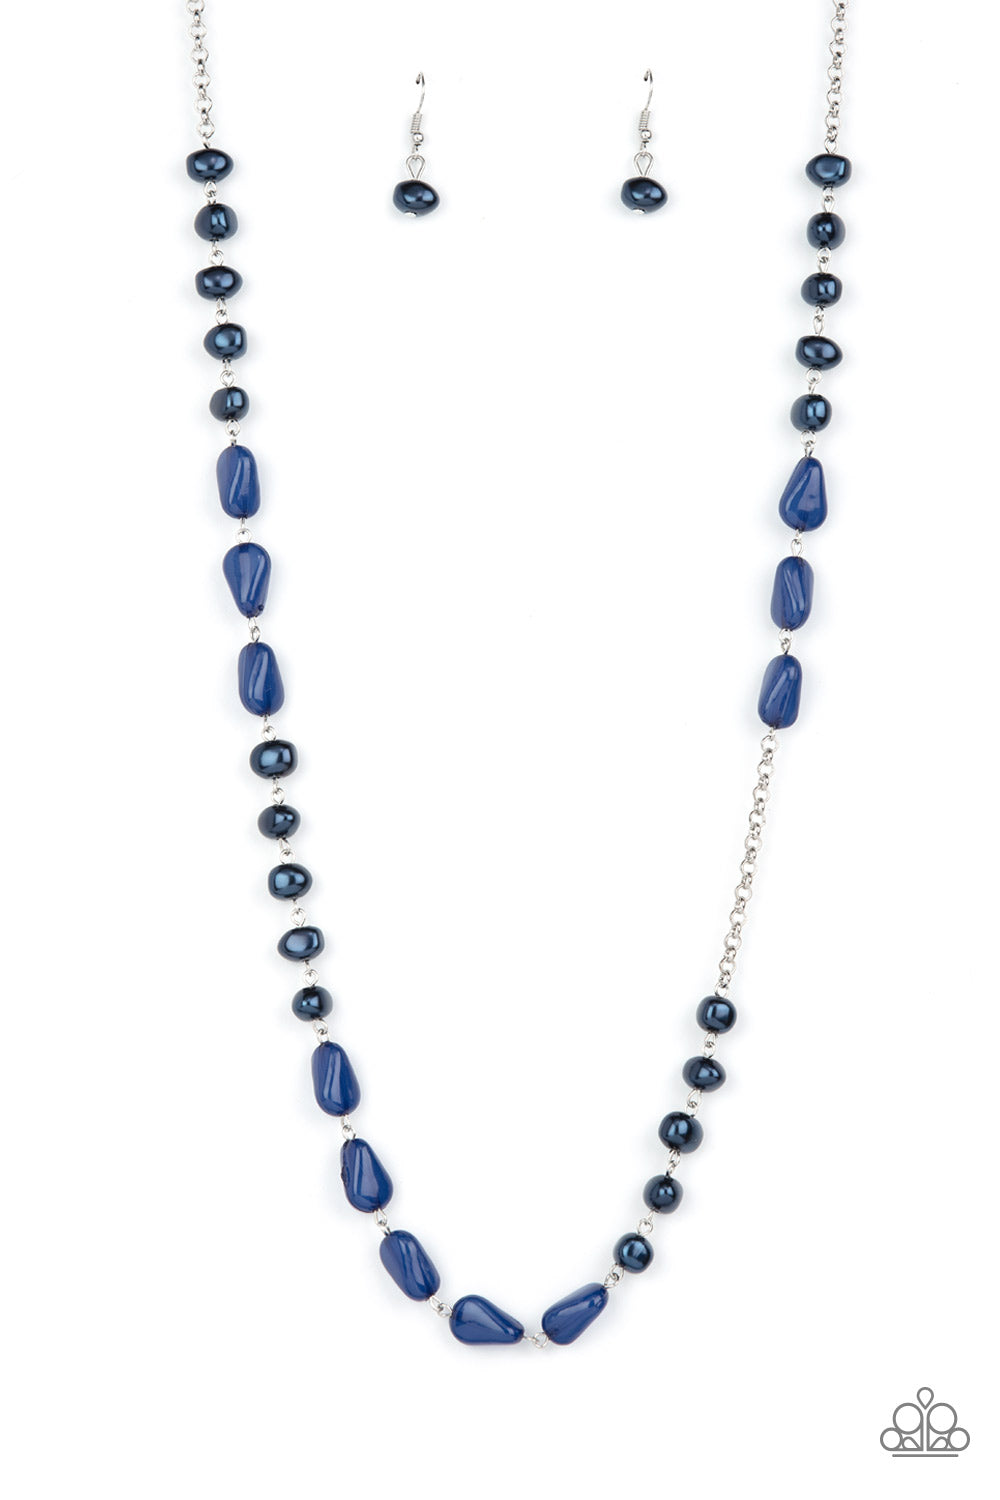 Shoreline Shimmer Paparazzi Accessories Necklace with Earrings Blue